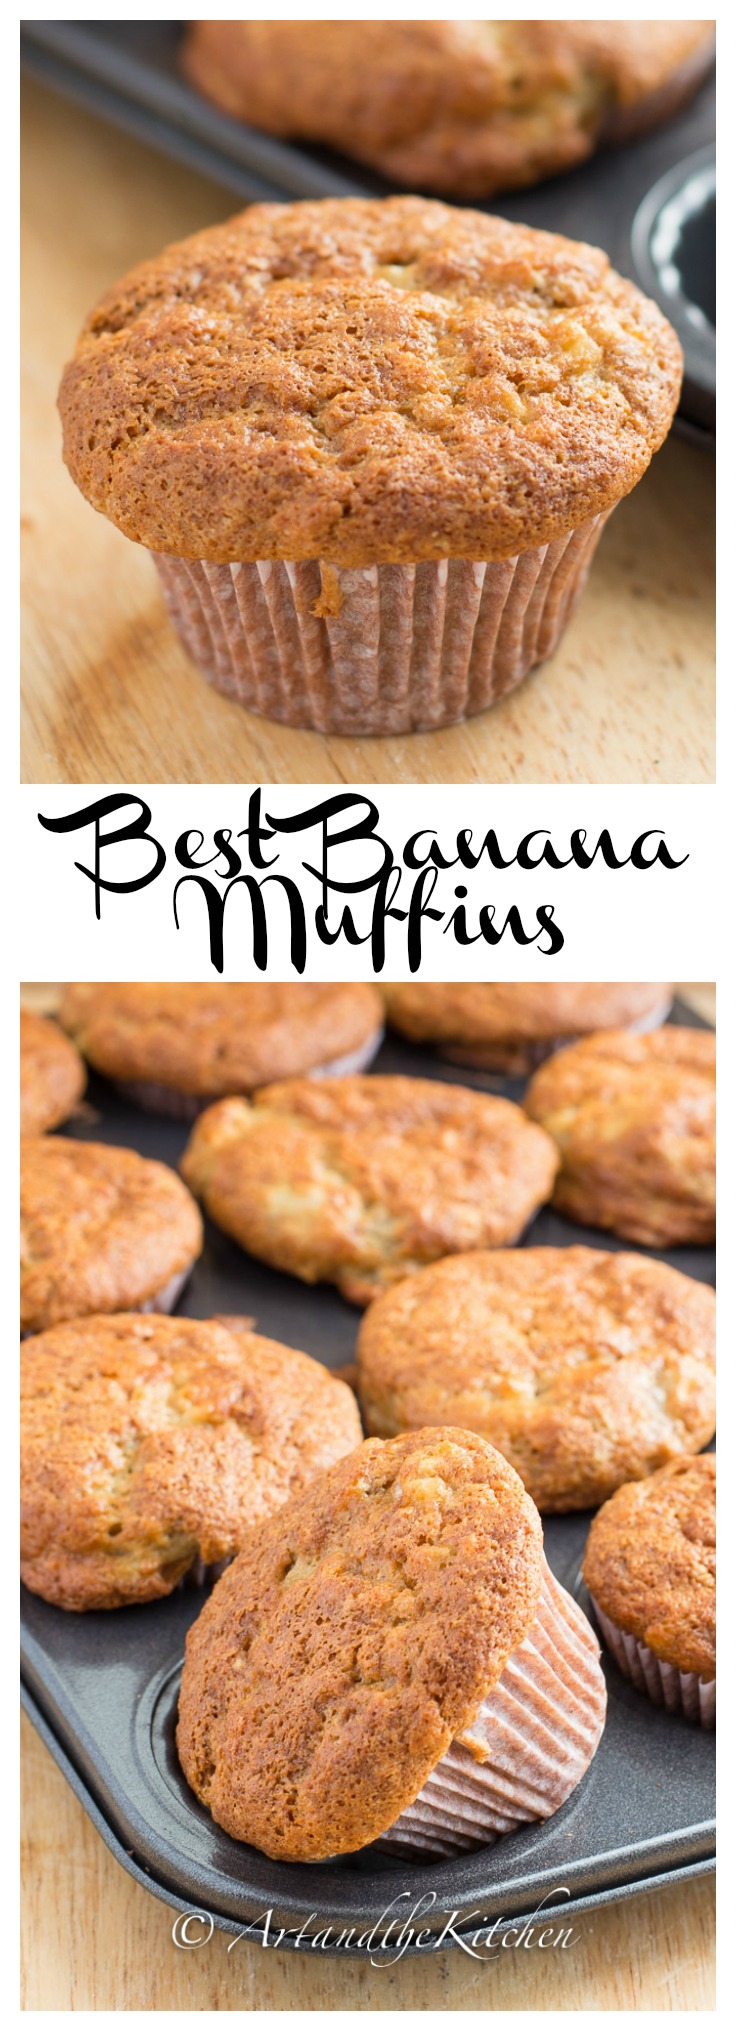 Best Banana Muffins are incredibly soft and moist with tasty, crisp muffin tops. This banana bread recipe is so quick and easy to make with simple ingredients. via @artandthekitch